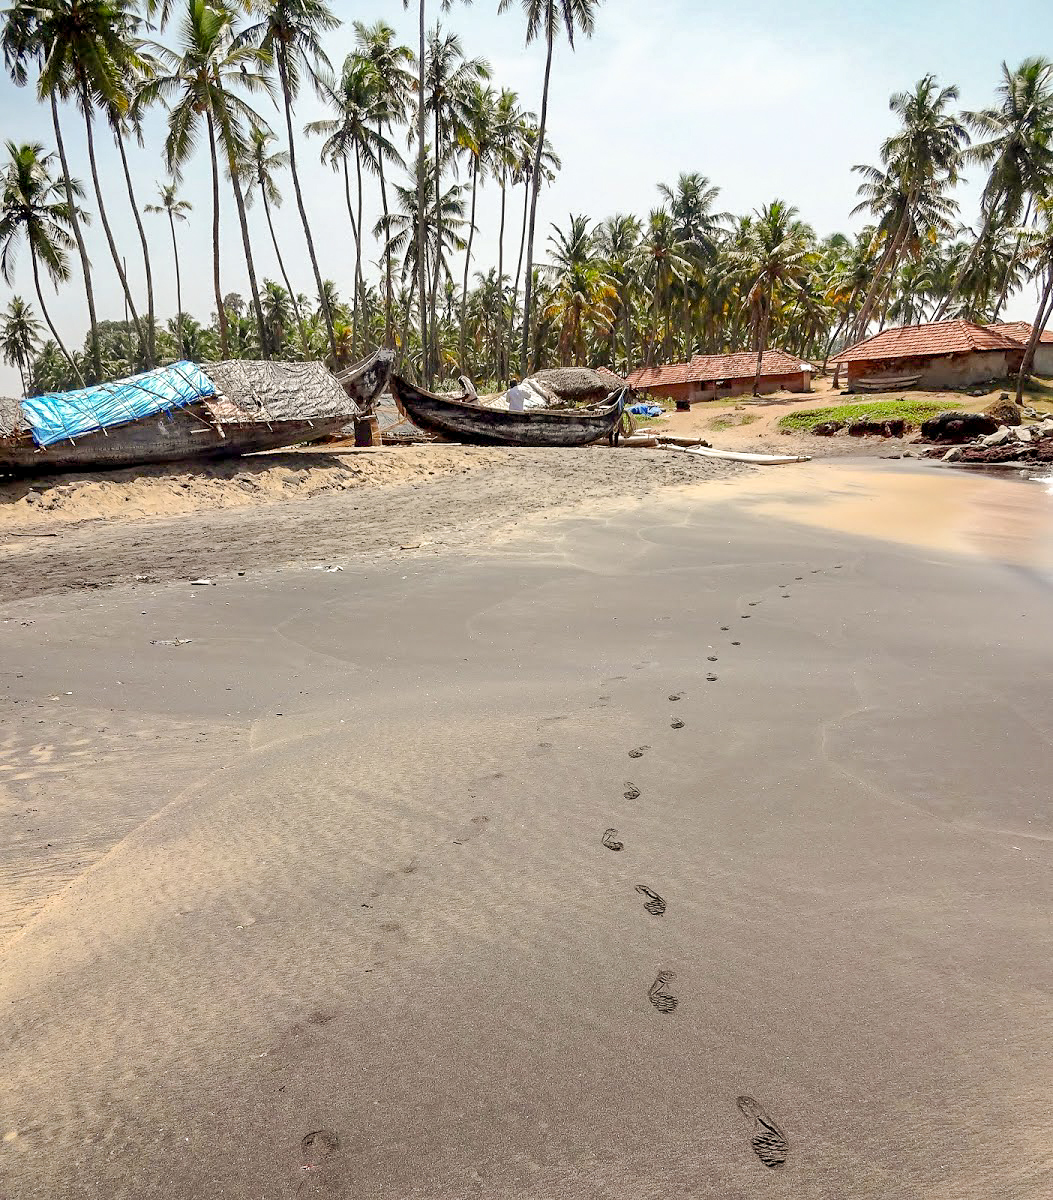 Footprints in the sand on Odayam beach, in the background wooden boats and palm trees, Varkala, Kerala, India